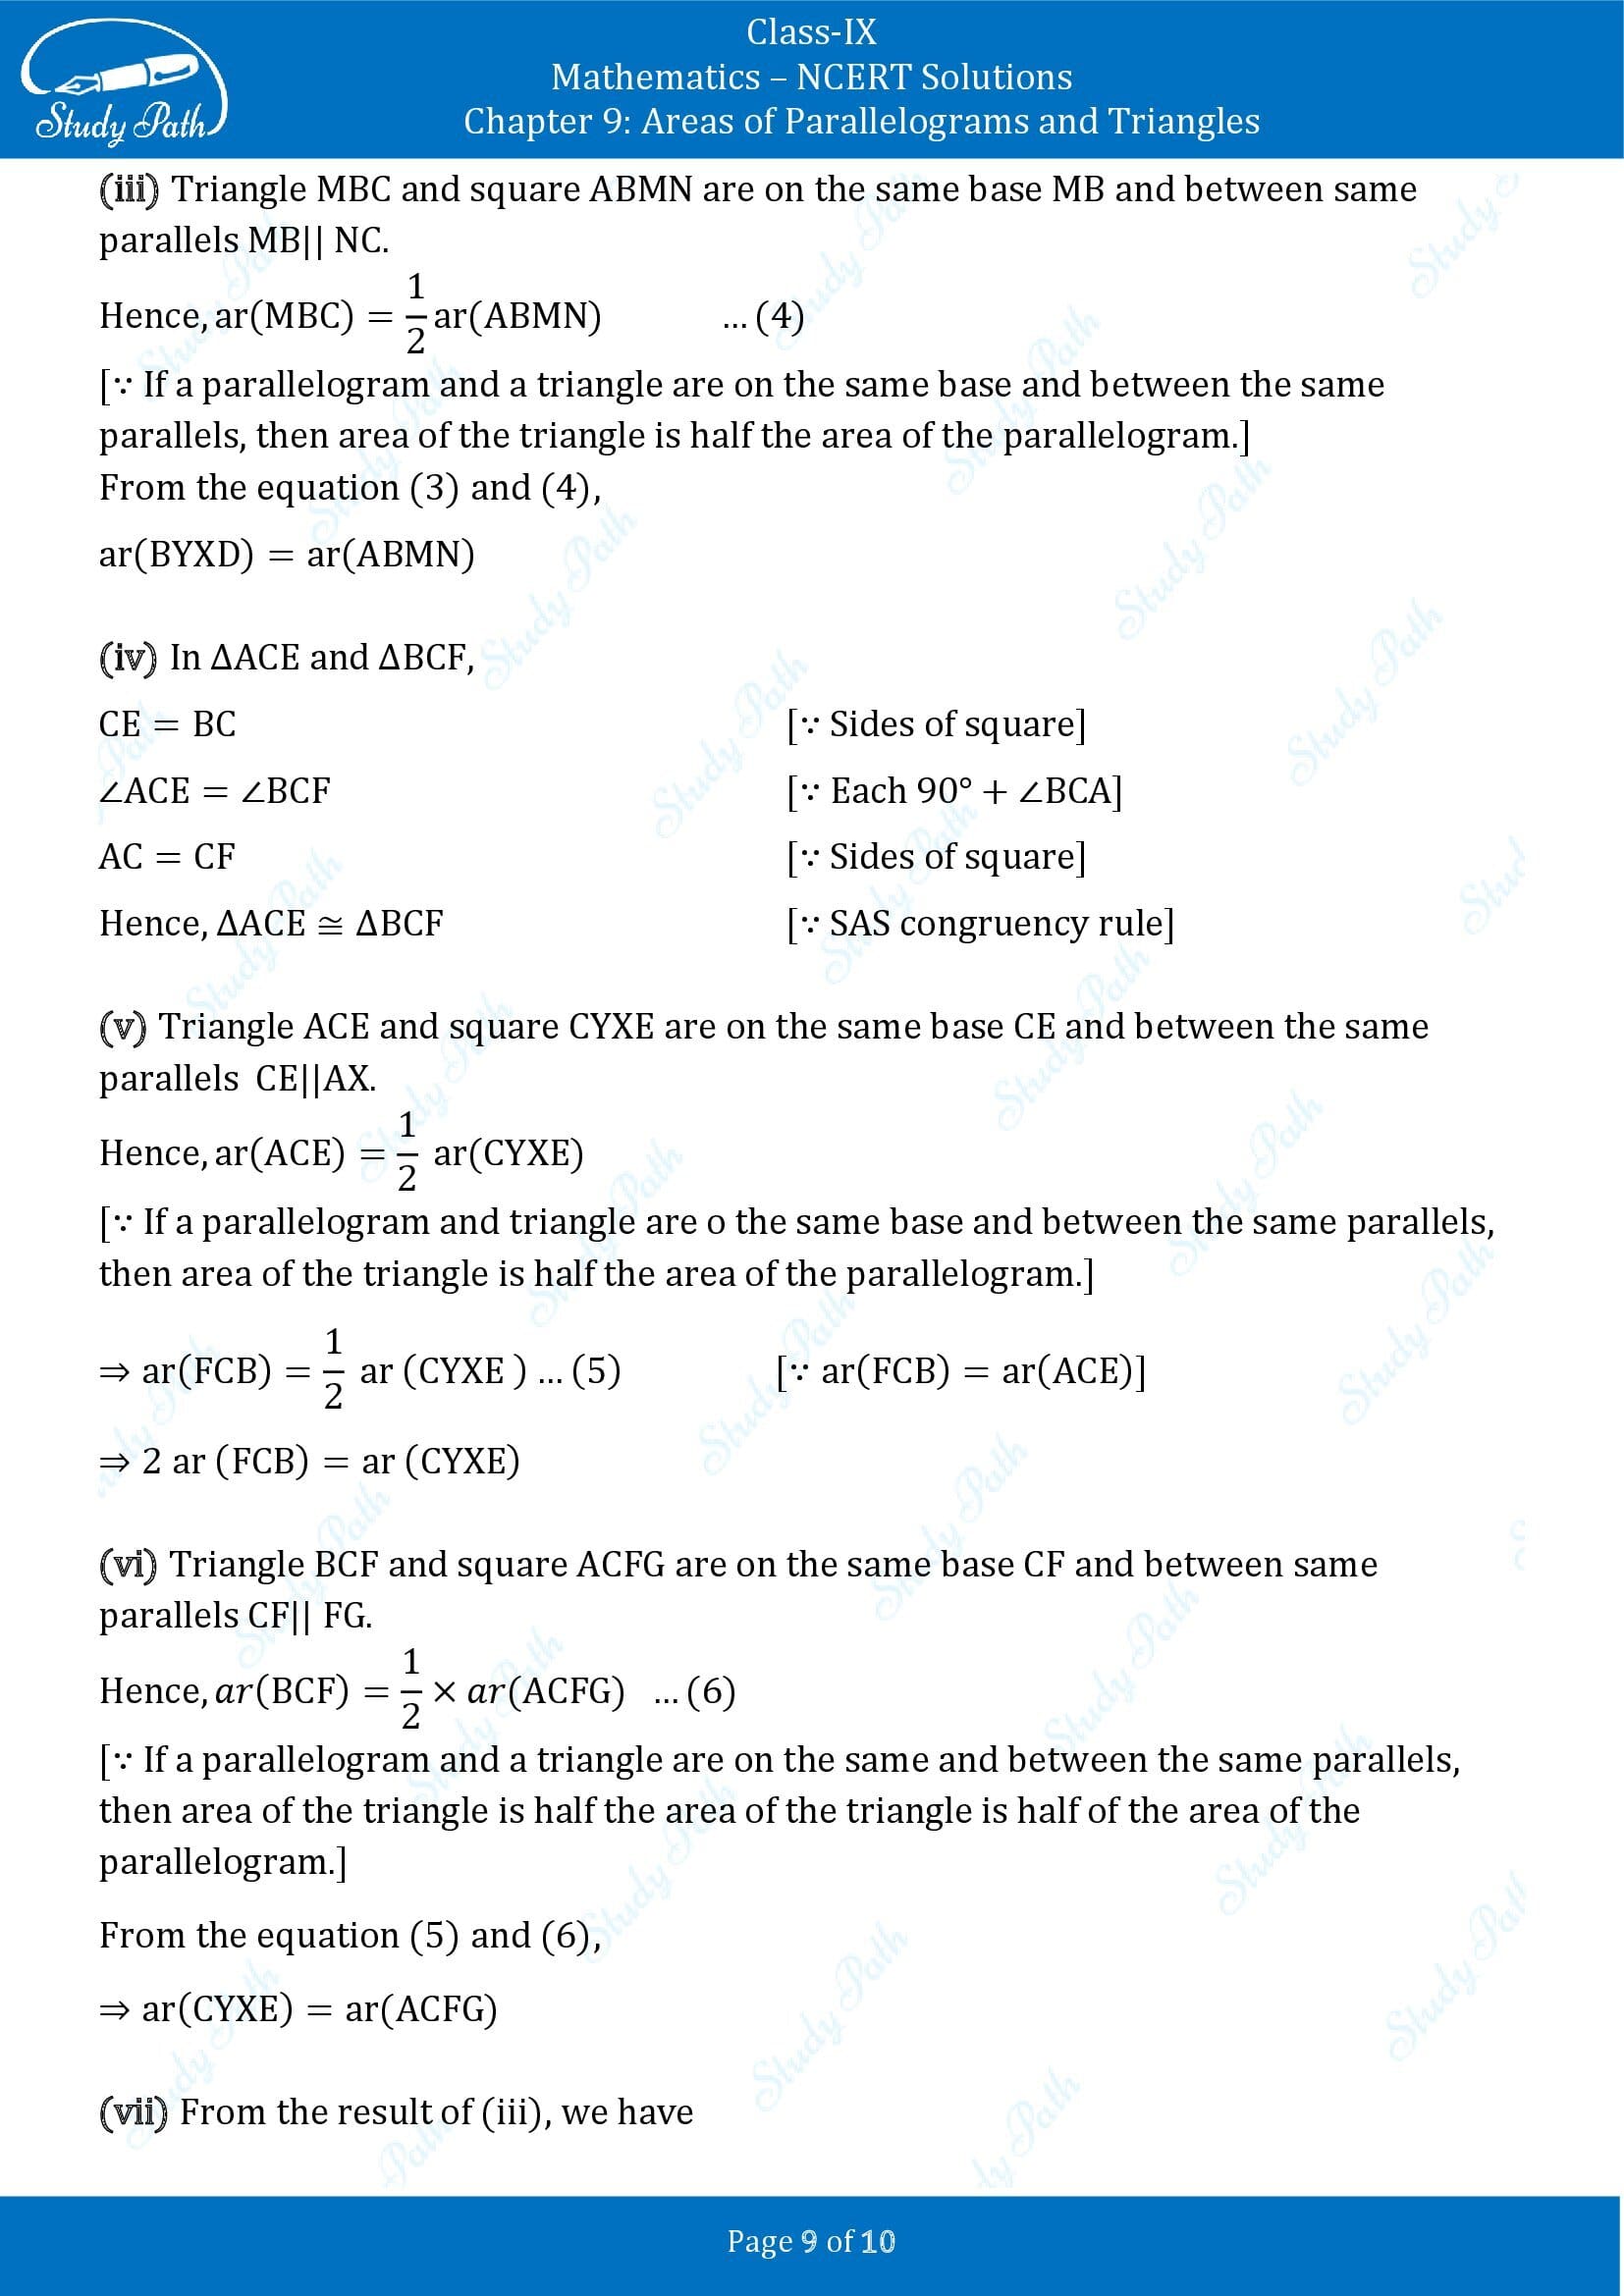 NCERT Solutions for Class 9 Maths Chapter 9 Areas of Parallelograms and Triangles Exercise 9.4 00009